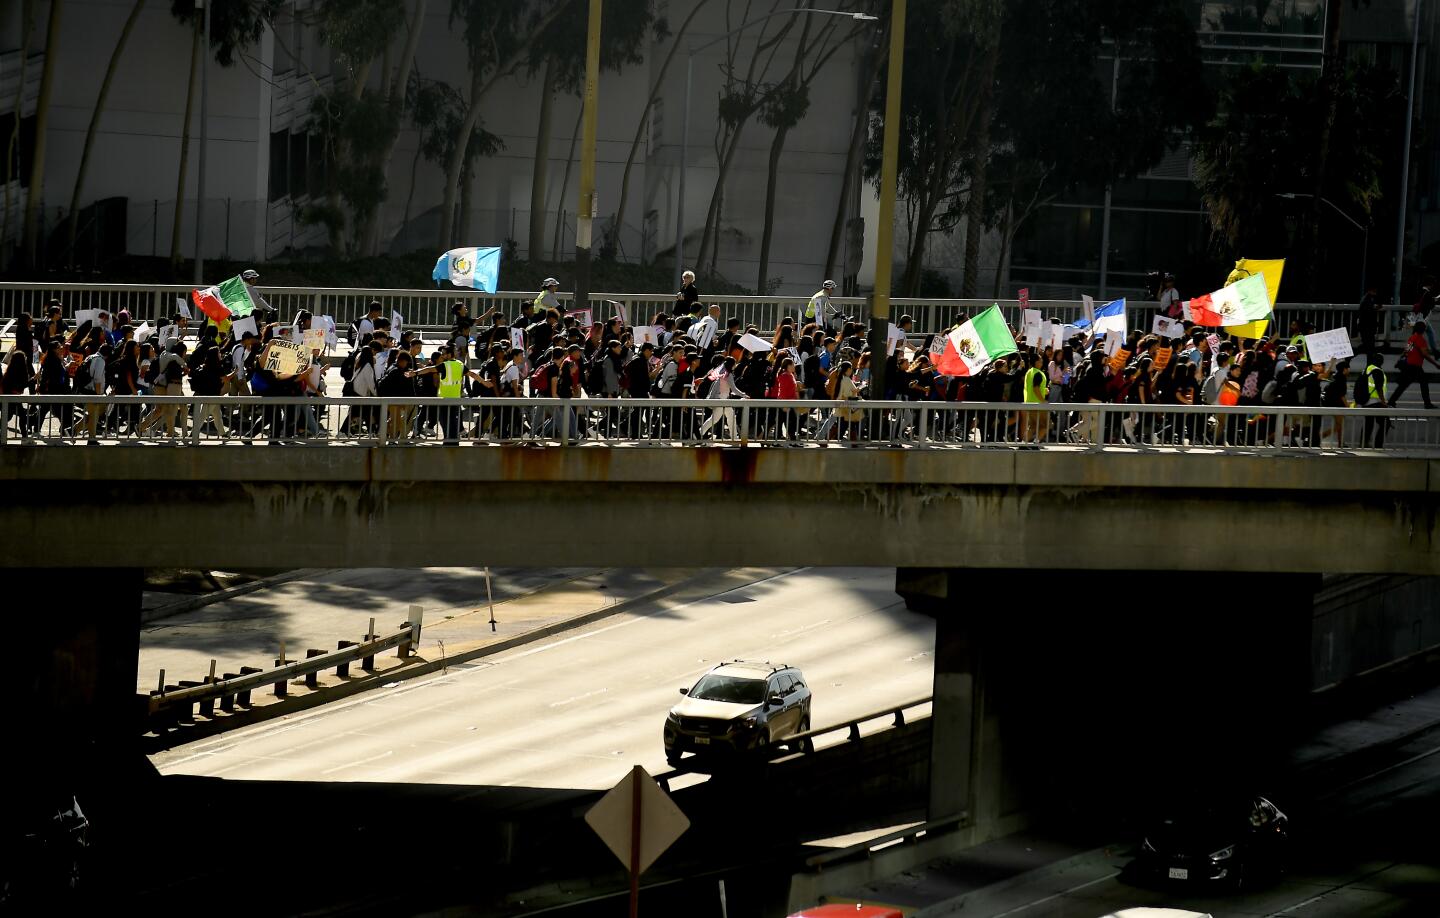 DACA supporters march over the 110 Freeway on 7th Street in Los Angeles.